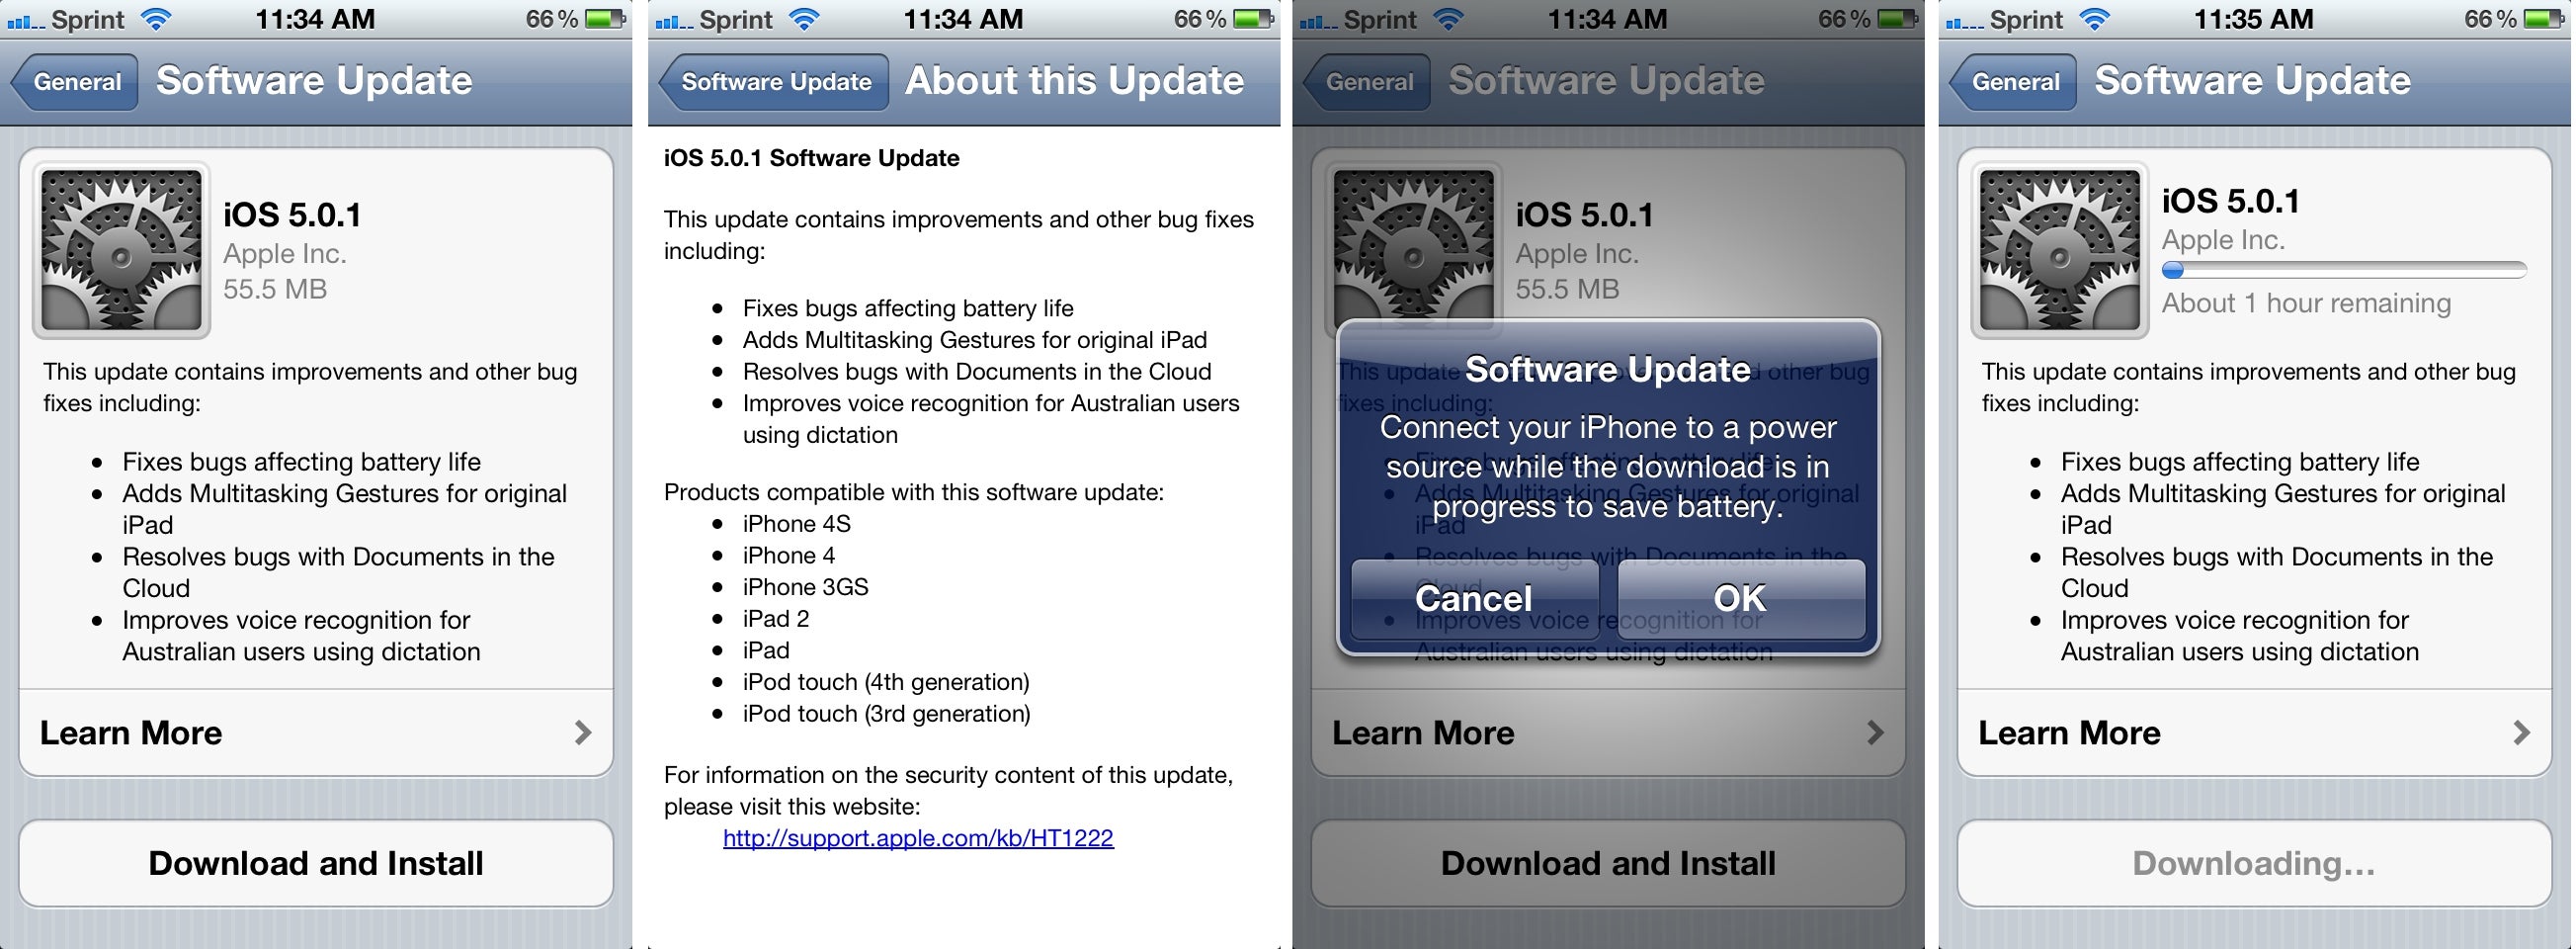 Apple's first OTA update has been sent out - Apple sends out its first OTA update for iOS 5.0.1-it's to fix the battery and more